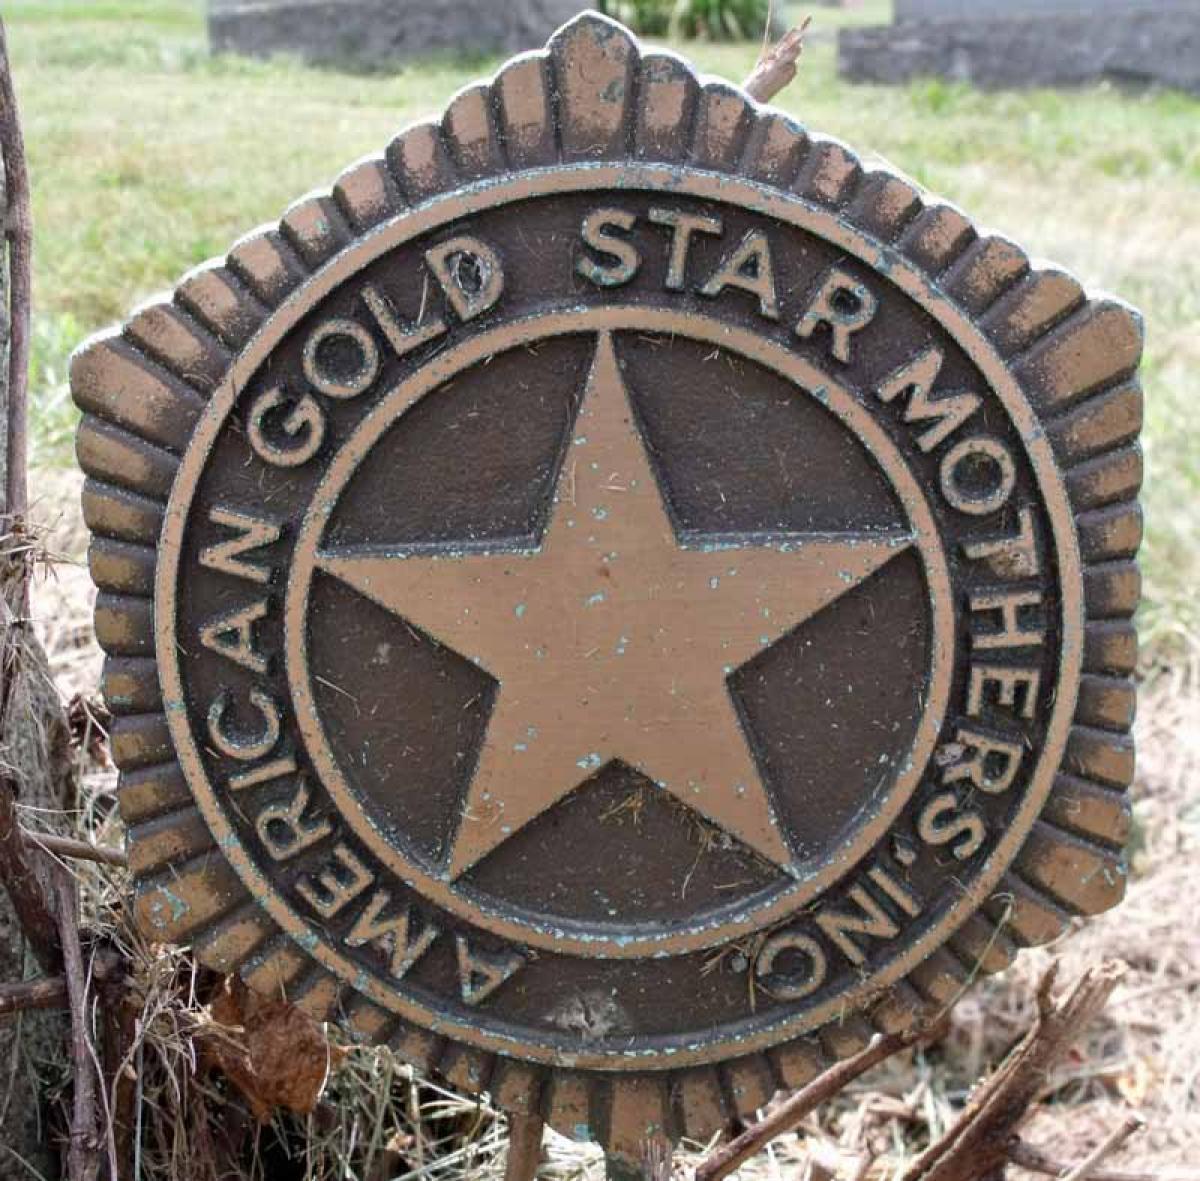 American Gold Star Mothers (AGSM) City of Grove Oklahoma